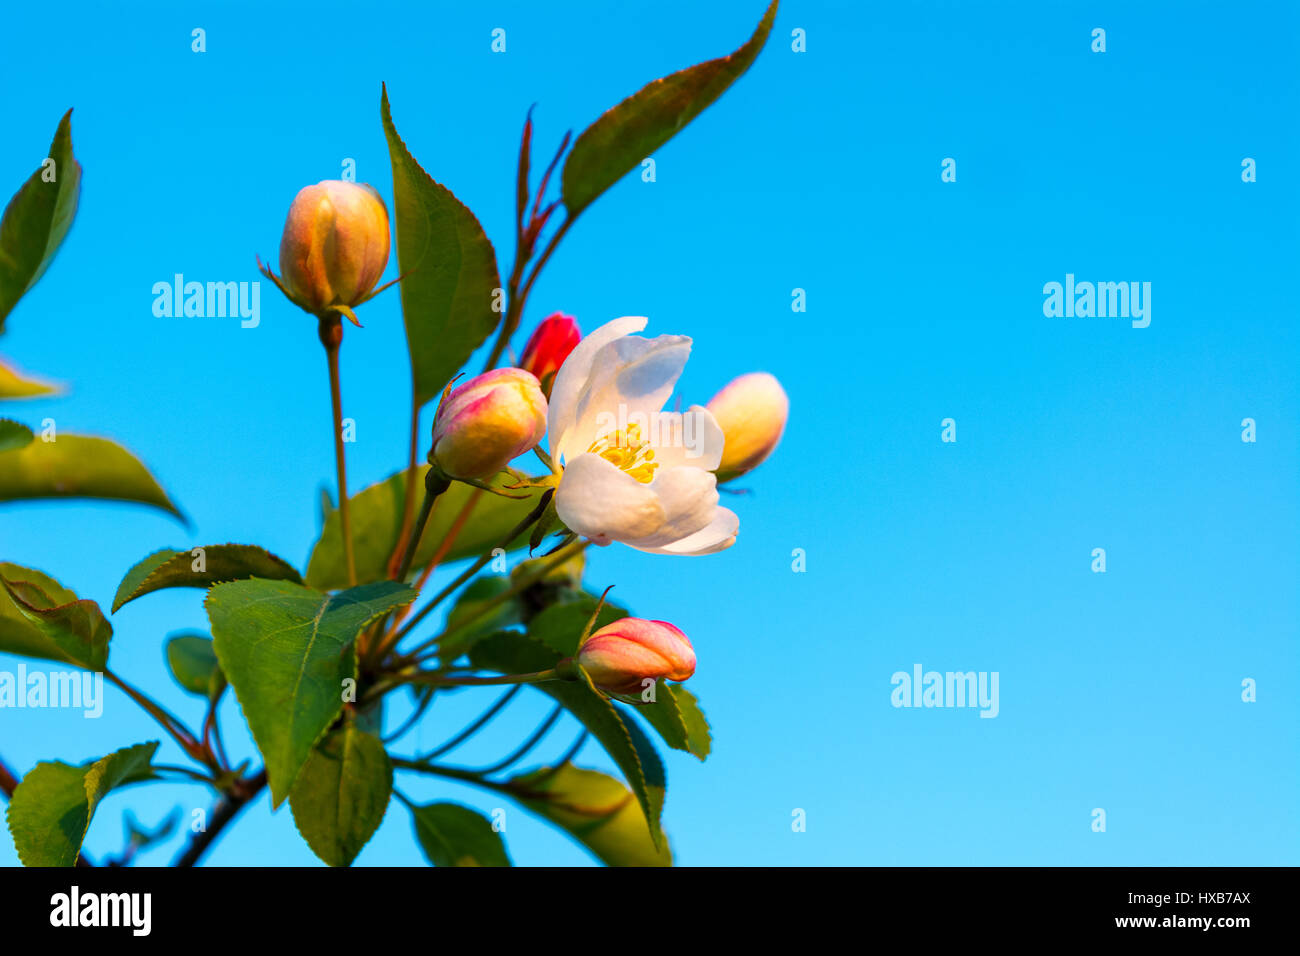 Apple blossom buds of creamy white sometimes tinged pink on blue sky background. Beautiful spring flowers Stock Photo